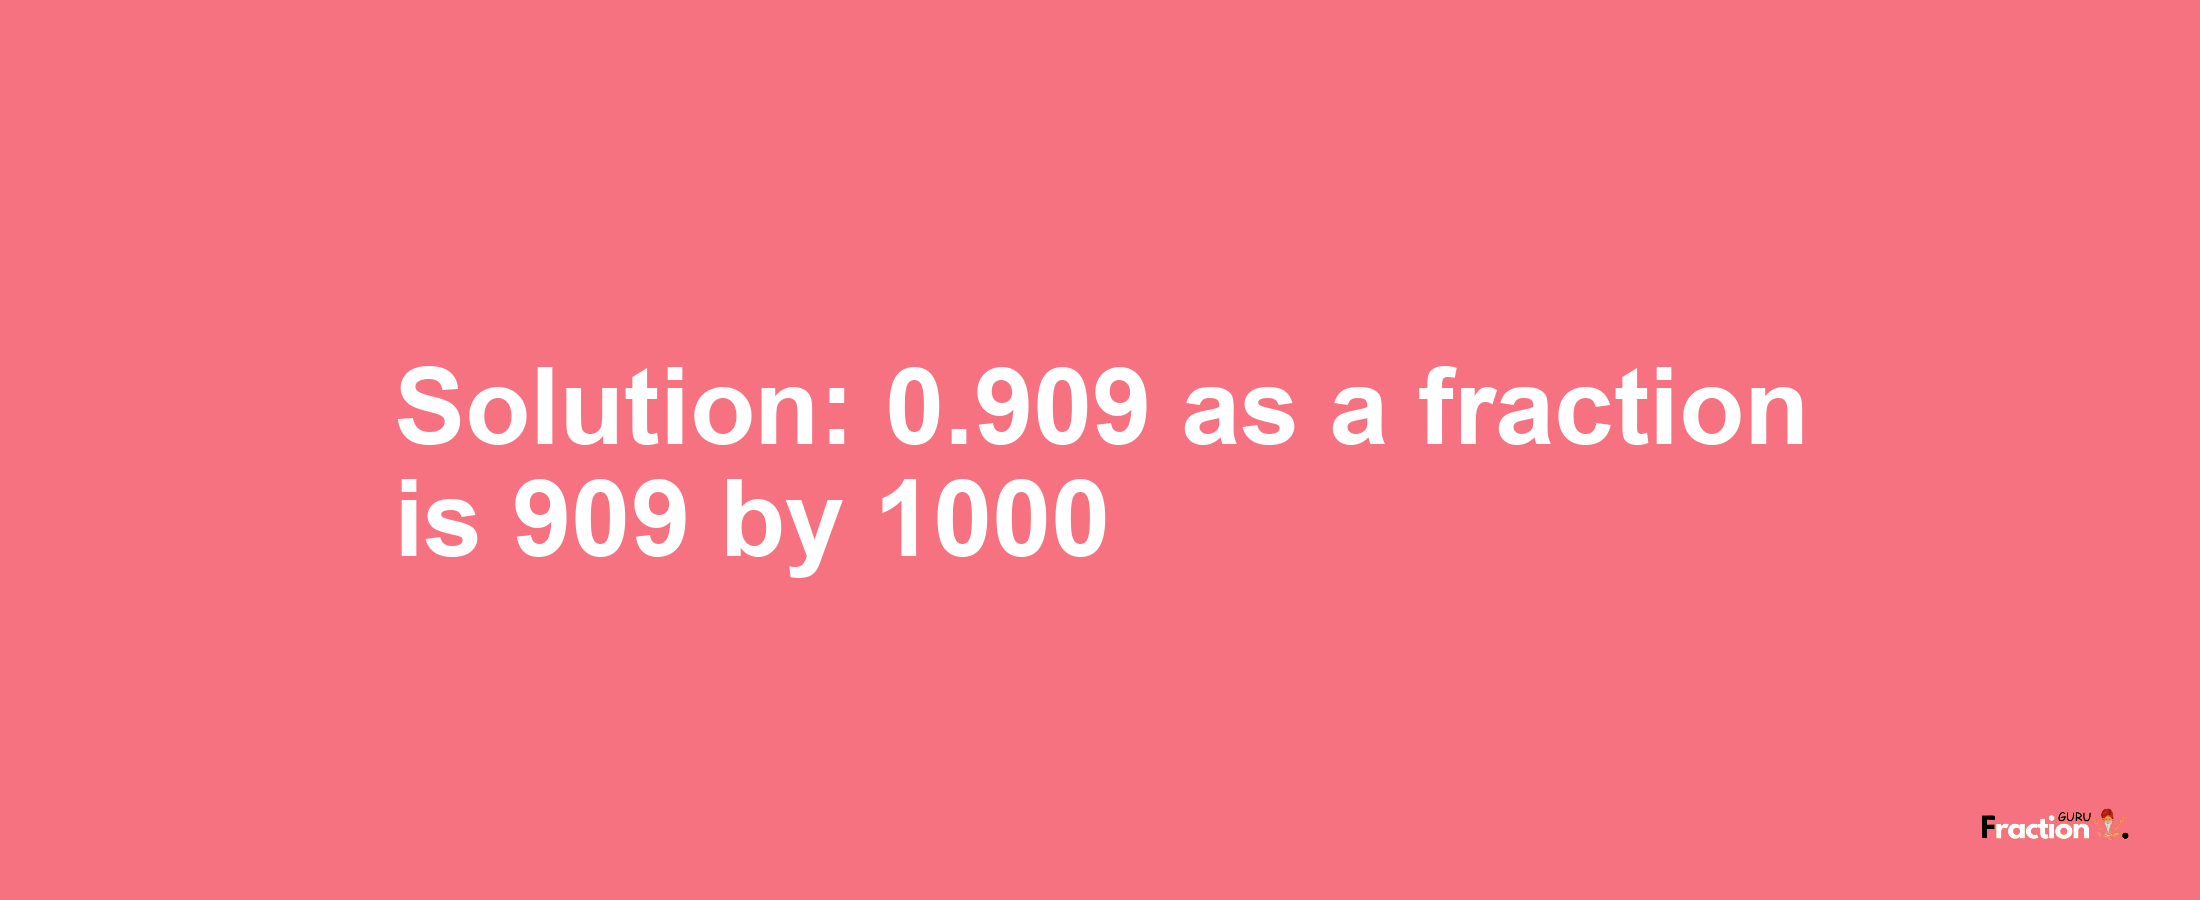 Solution:0.909 as a fraction is 909/1000